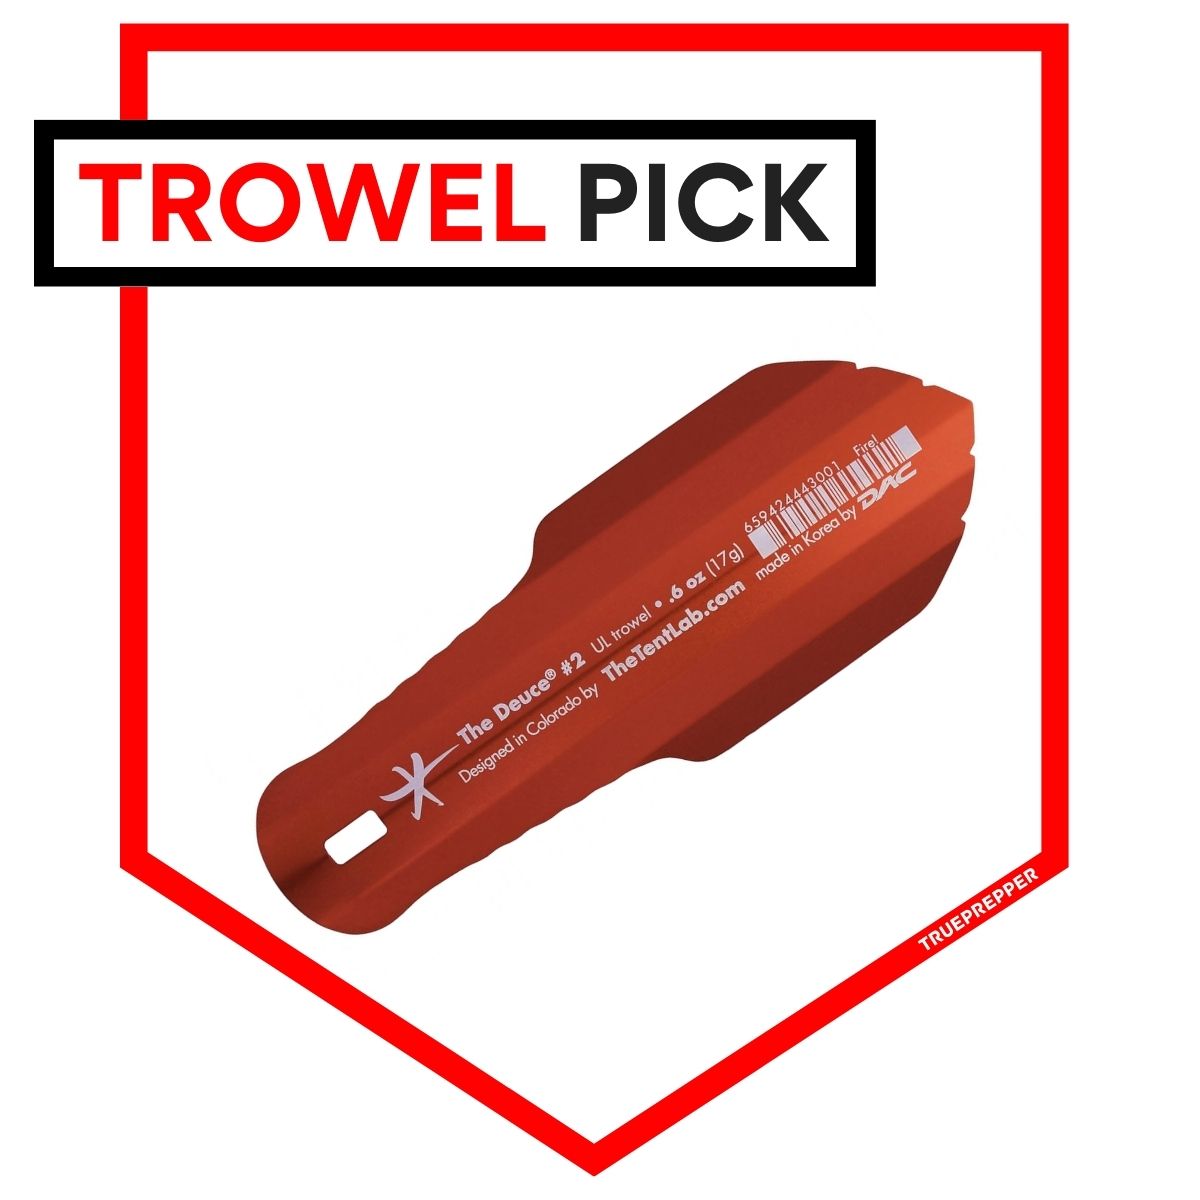 The Deuce 2 Trowel for Catholes Camping Tents and Lightweight Backpacking